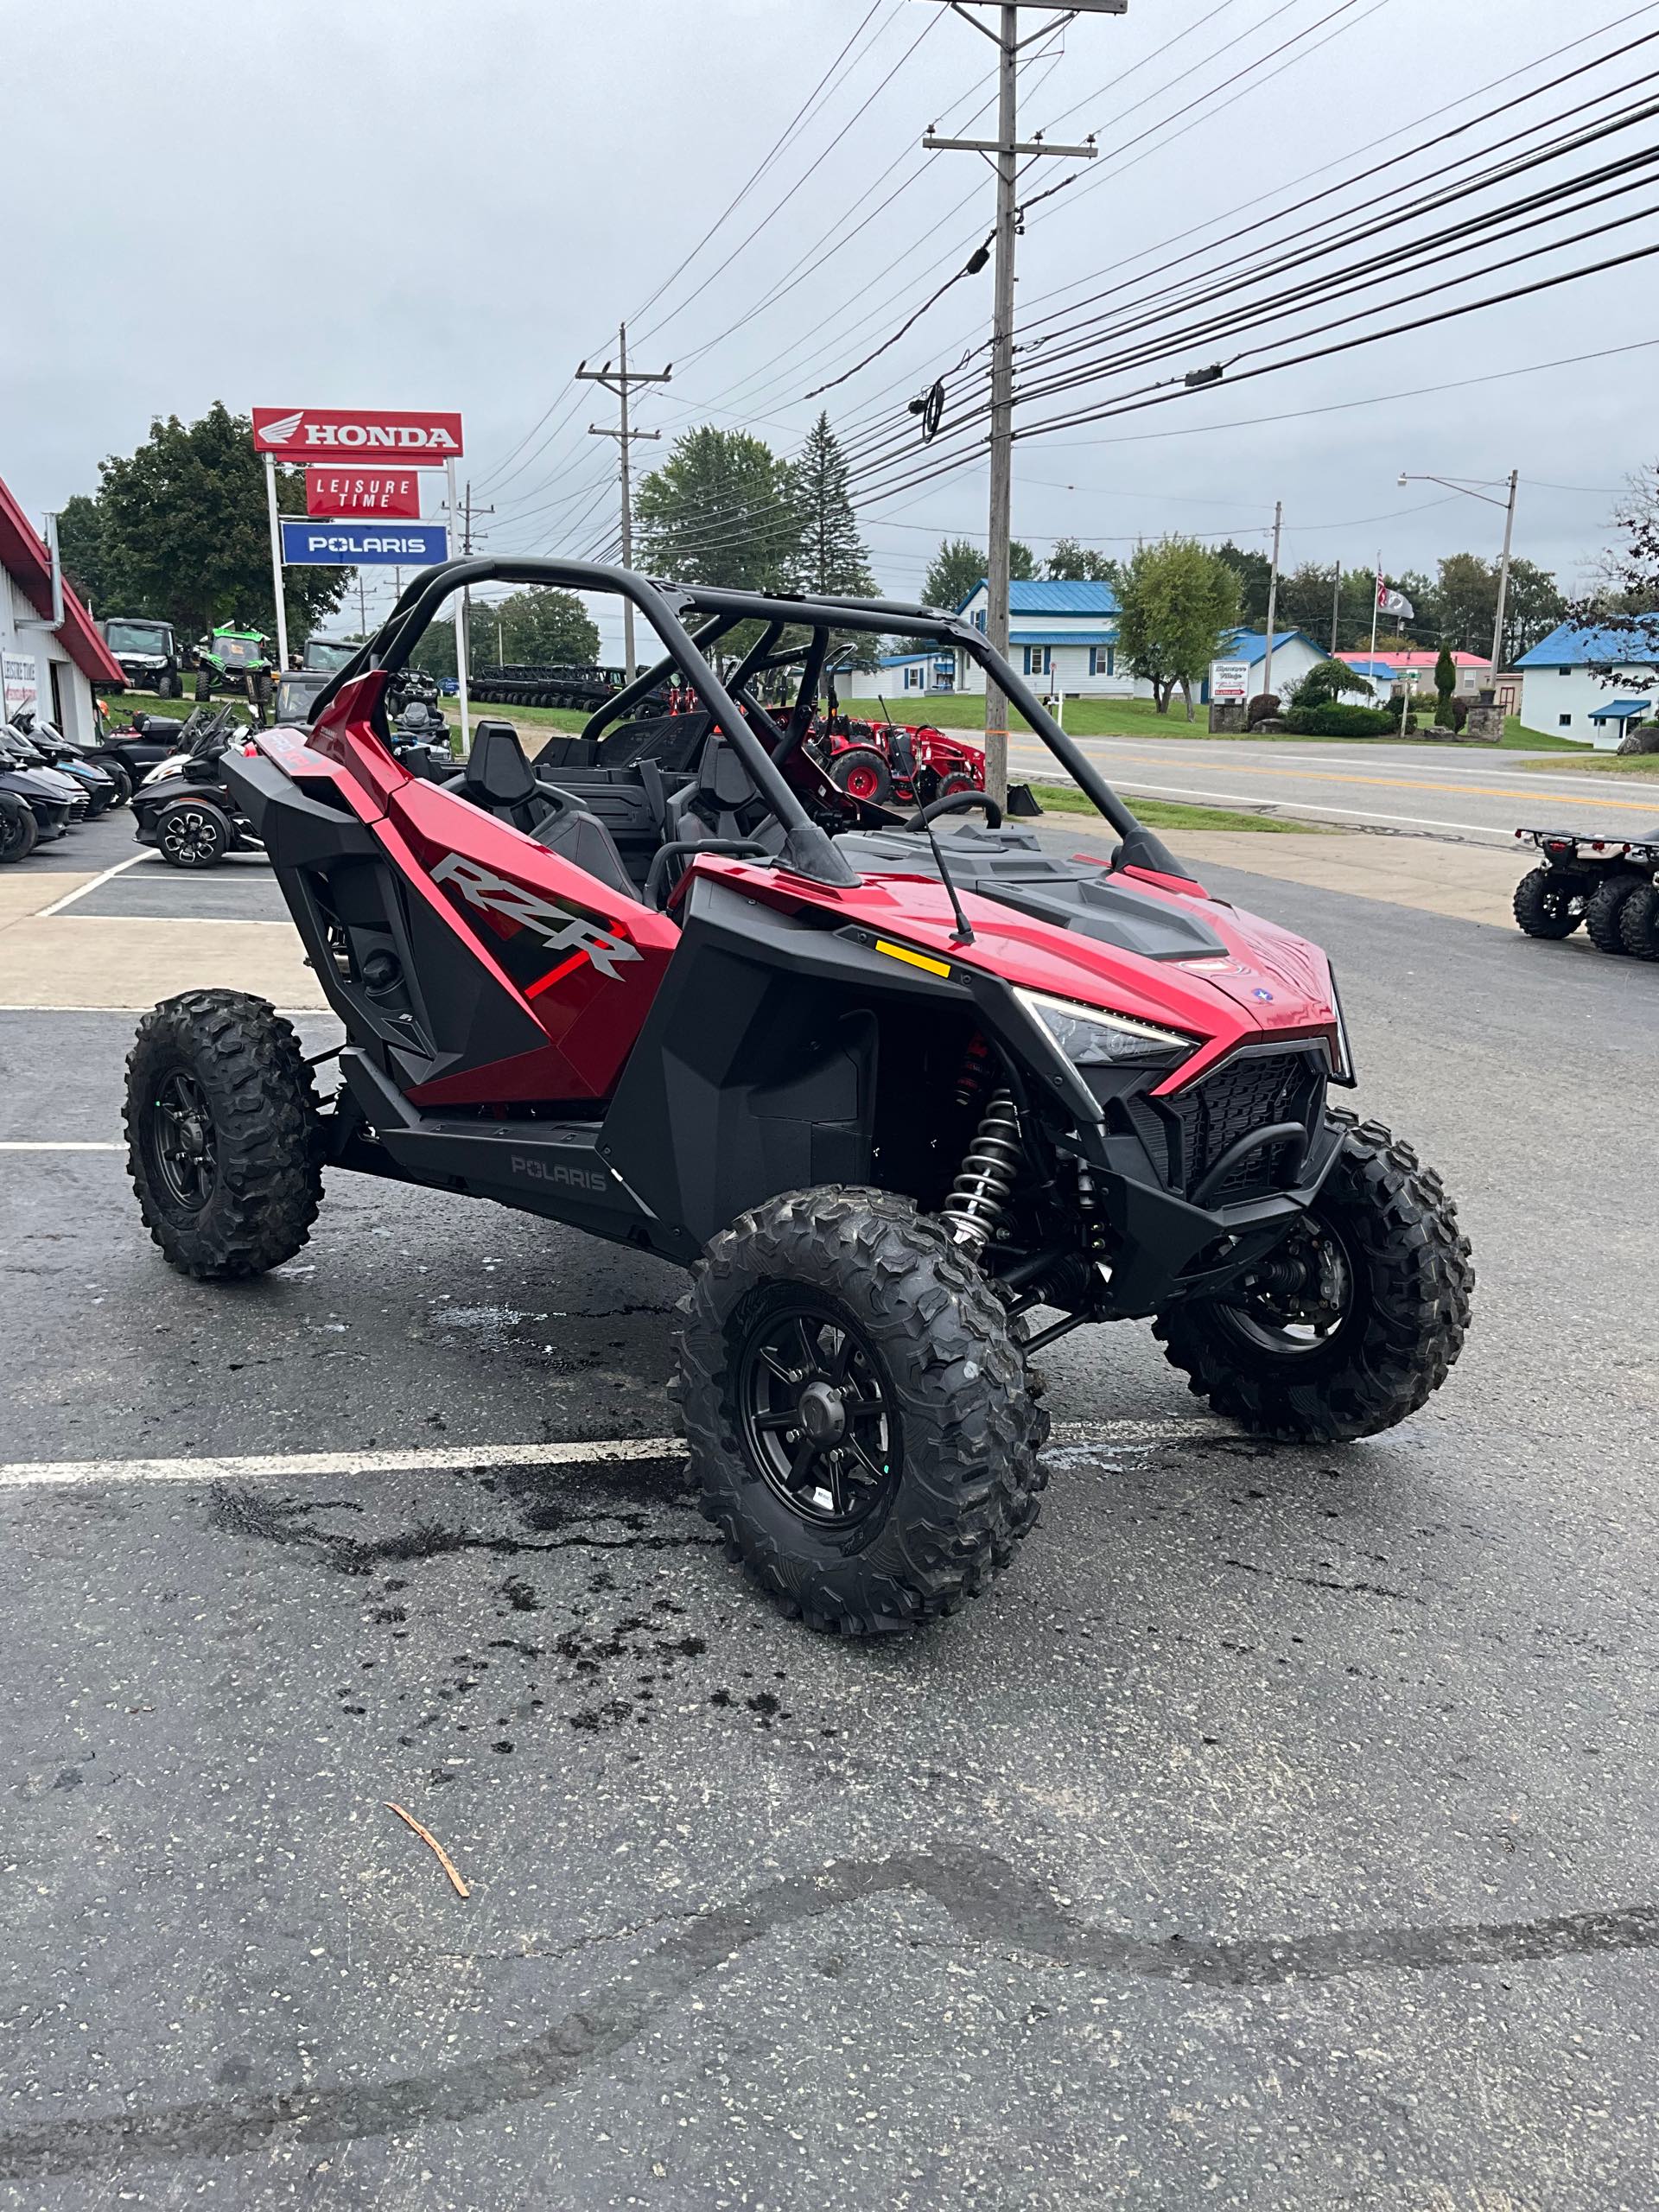 2023 Polaris RZR Pro XP Ultimate at Leisure Time Powersports of Corry